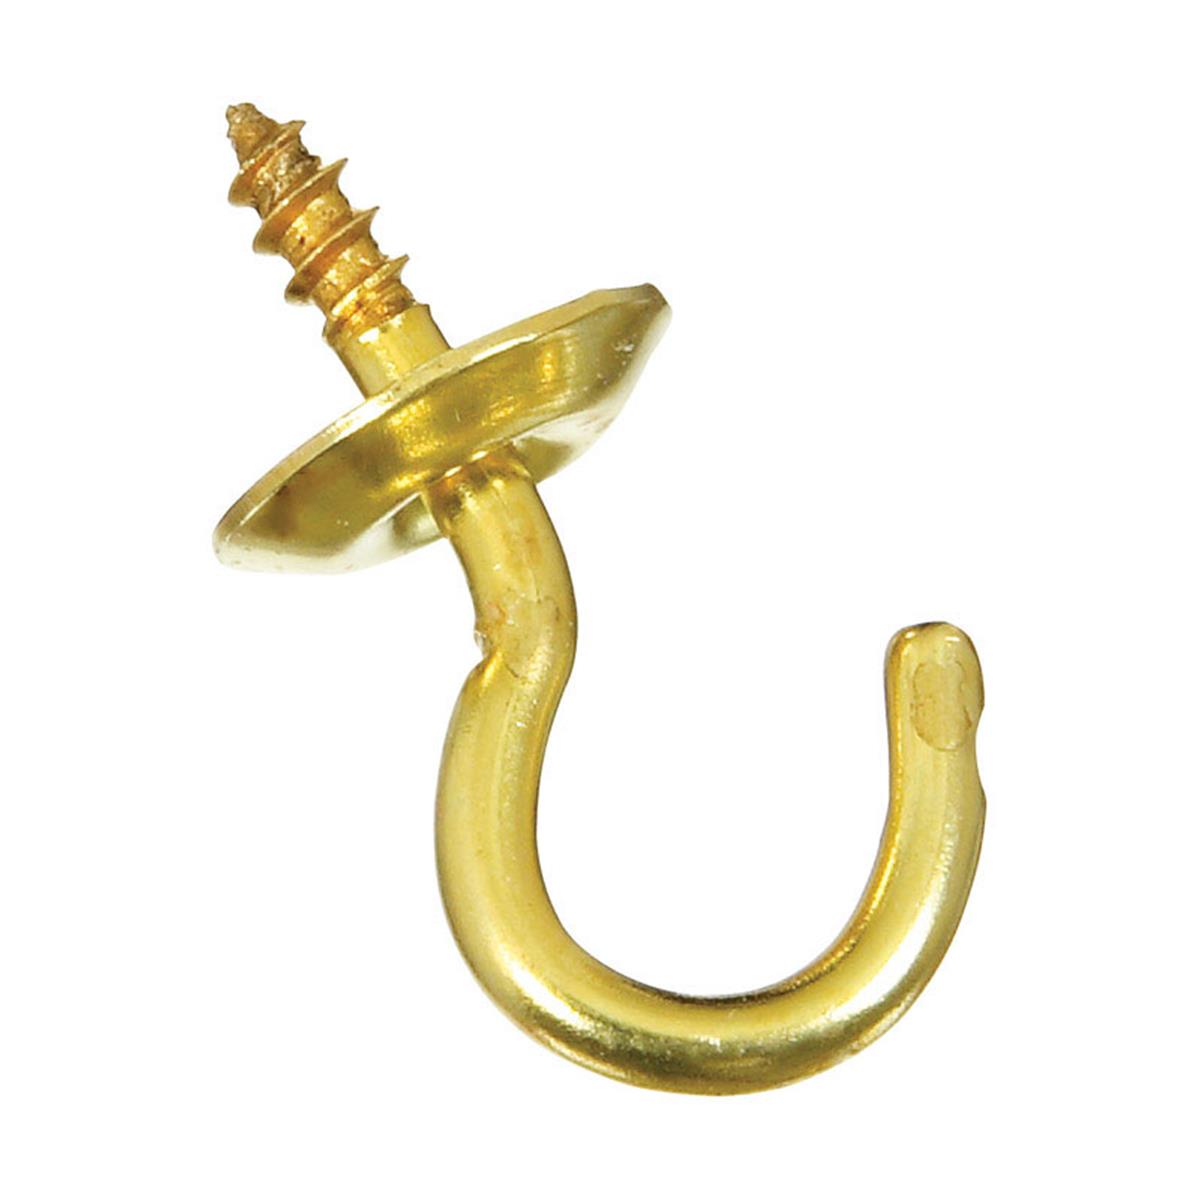 5706221 0.5 In. Solid Brass Cup Hook - Pack Of 6